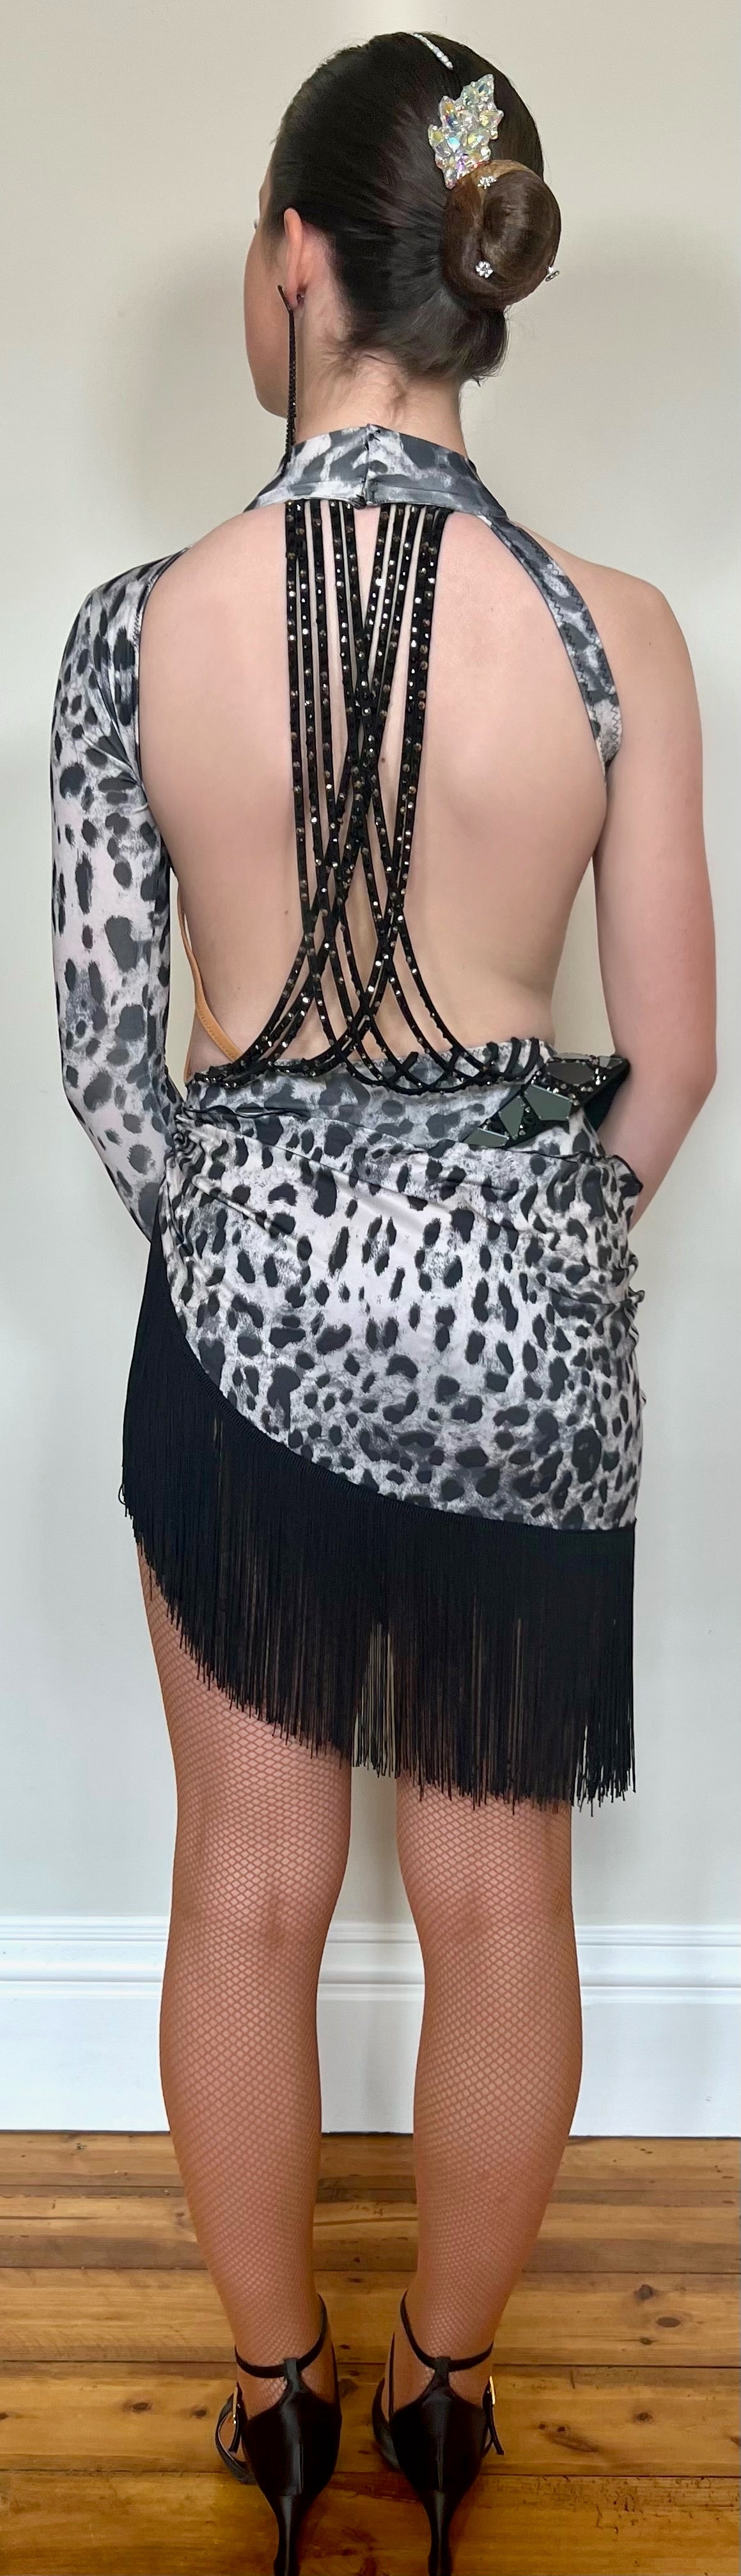 093 Black & White Leopard Cut Out one sleeve Latin Dress. Hanging detail to back decorated with black mirrors & jet stones. Rigid detail to right hip.